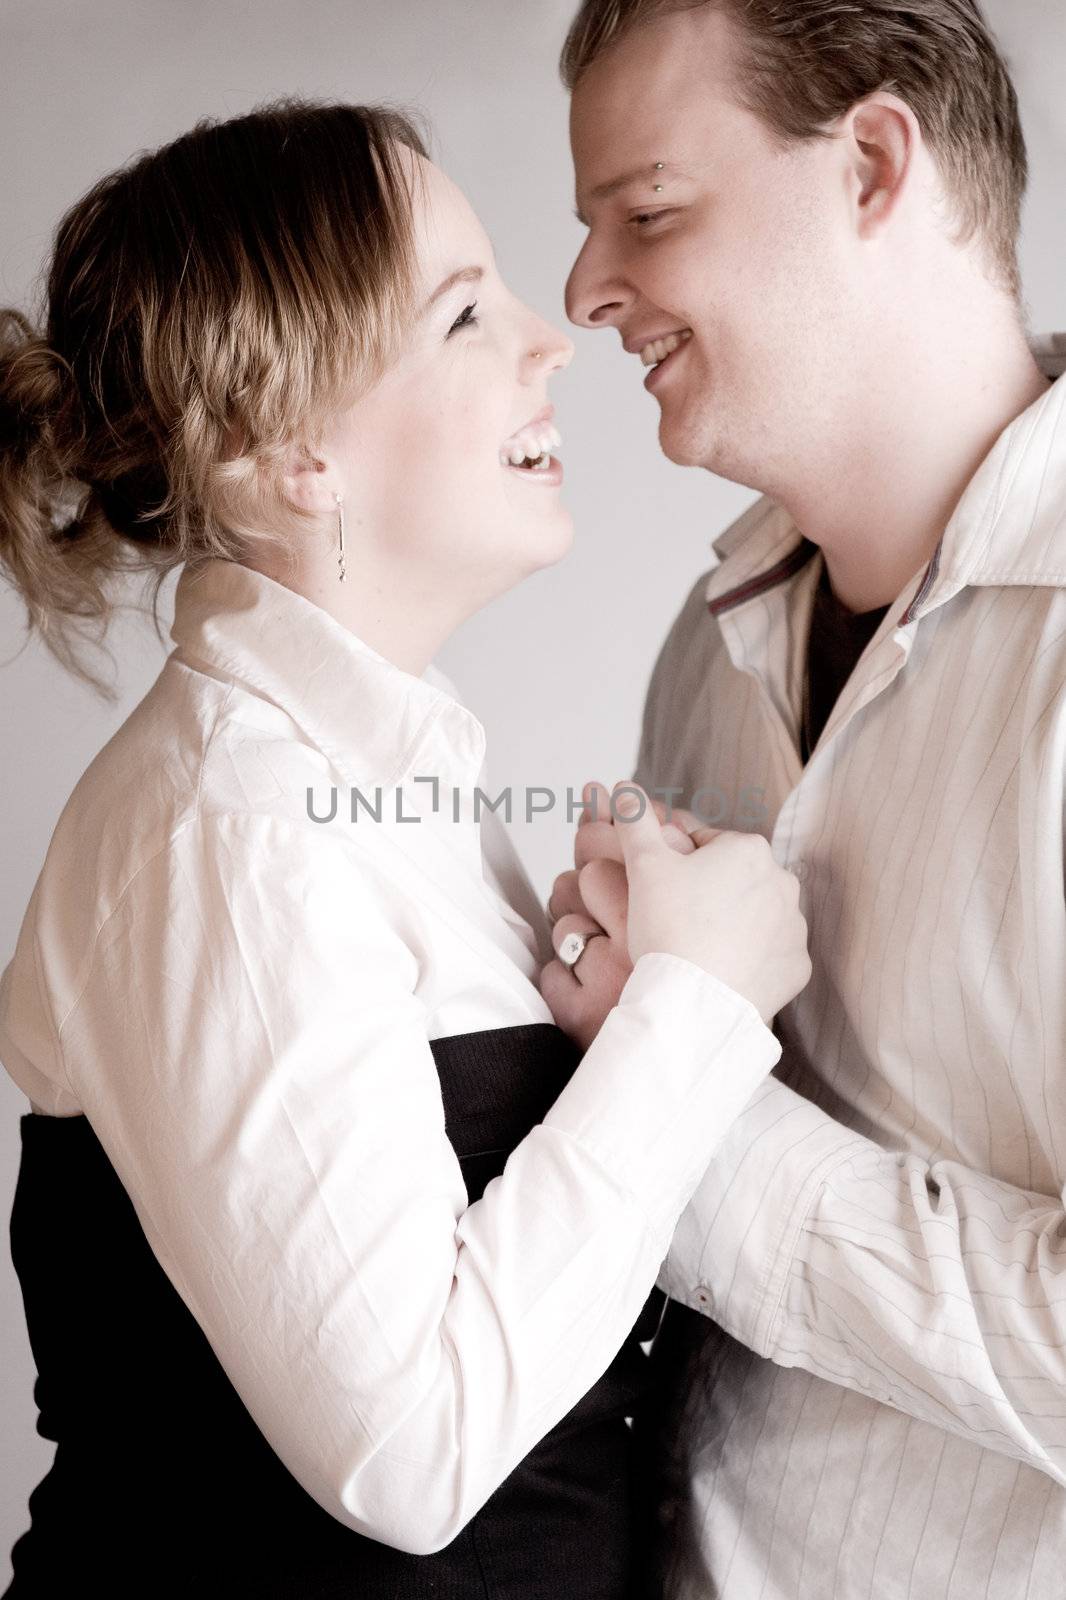 Studio portrait of a young amorous couple laughing